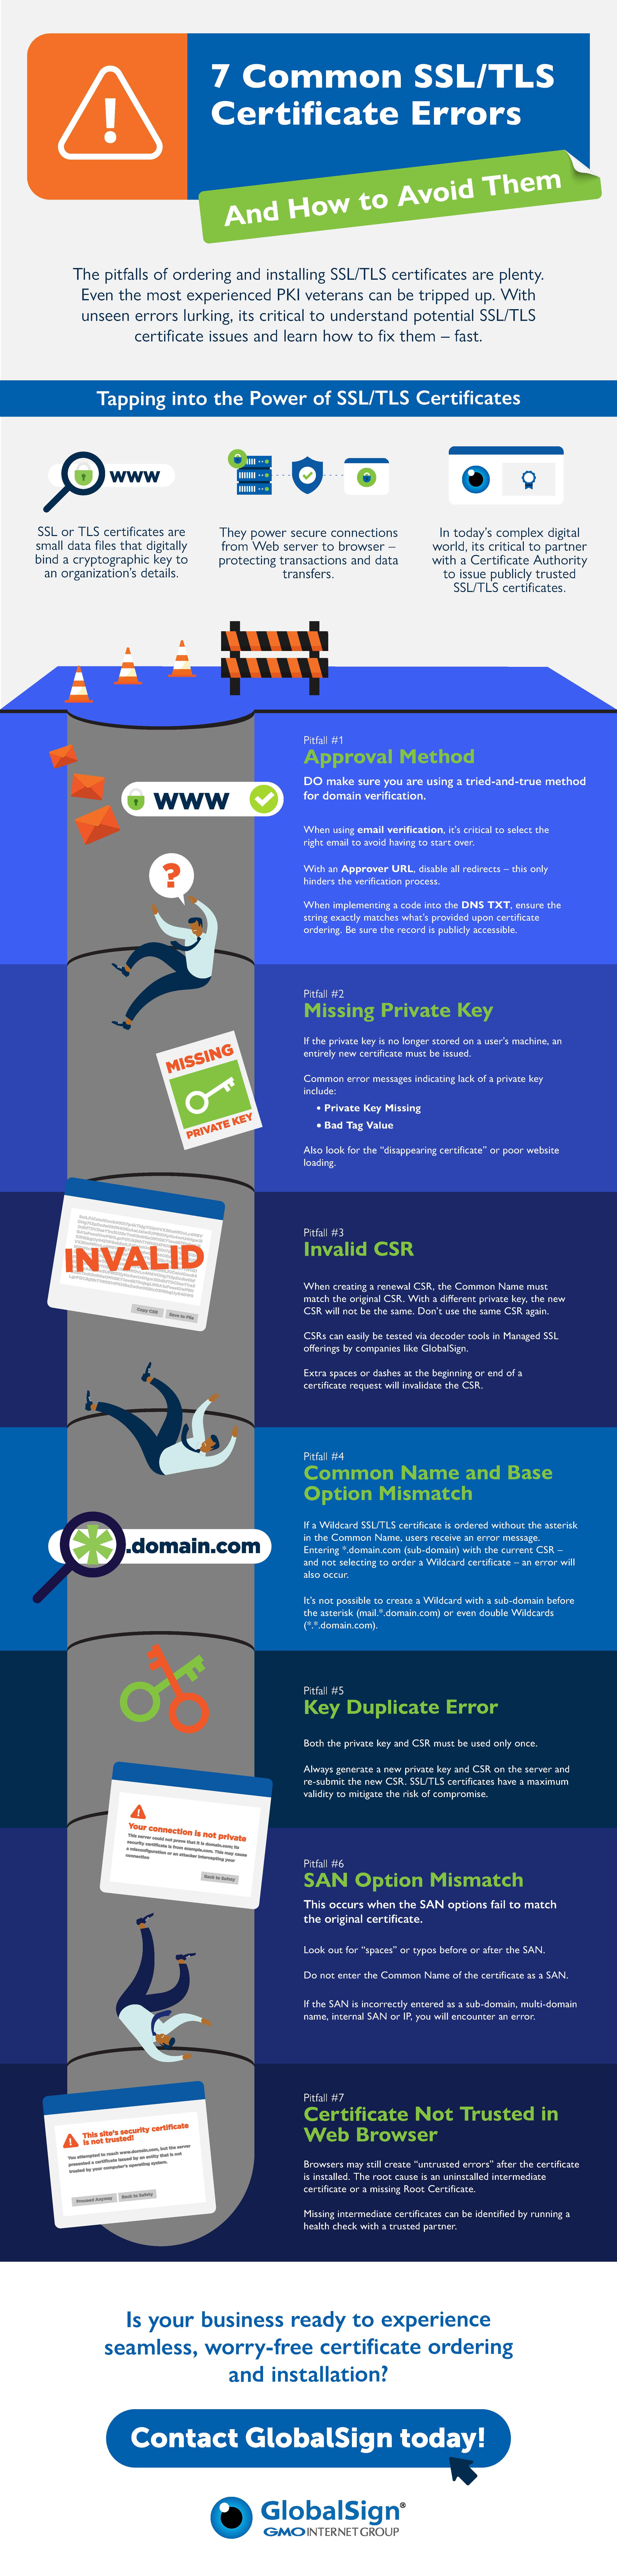 Infographic - 7 Common SSL TLS Certificate Errors and How to Avoid Them 